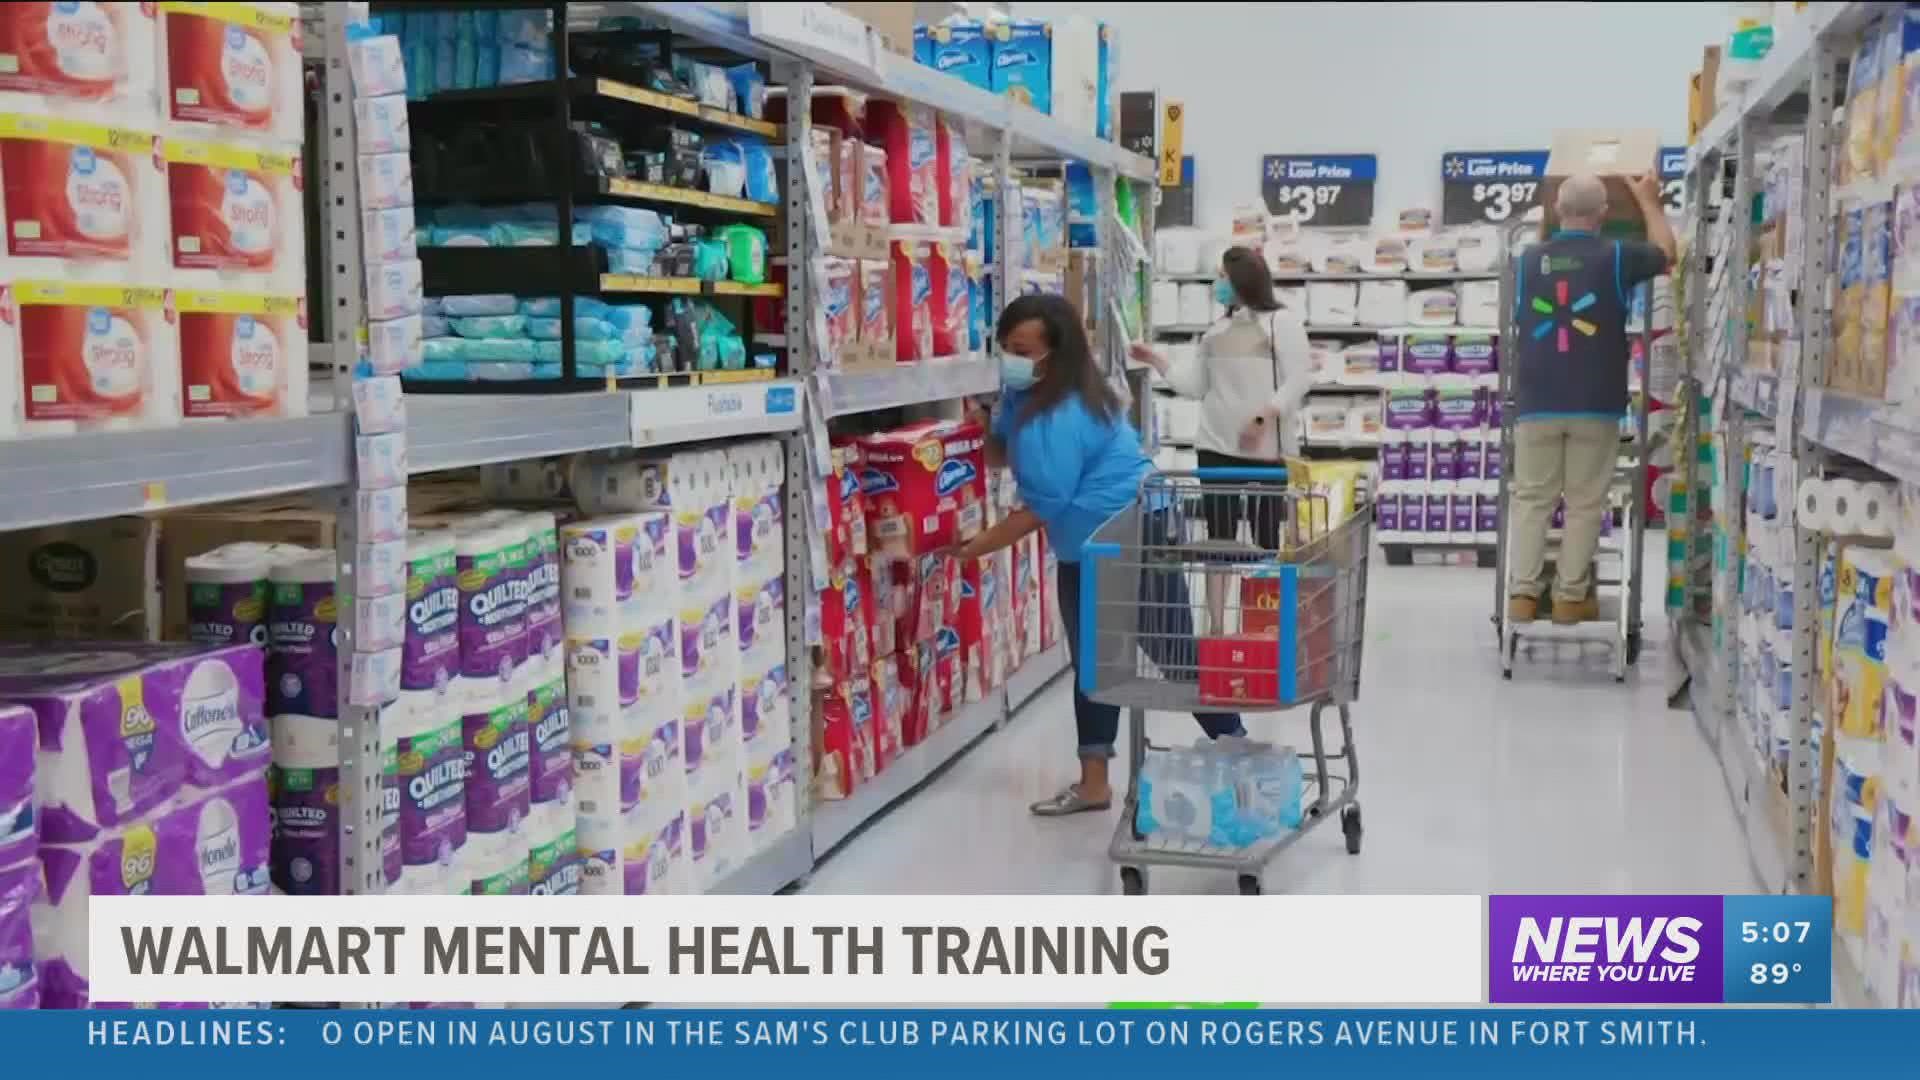 Walmart is launching Mental Health First Aid training that teaches associates how to identify, understand and respond to people who are struggling with mental health